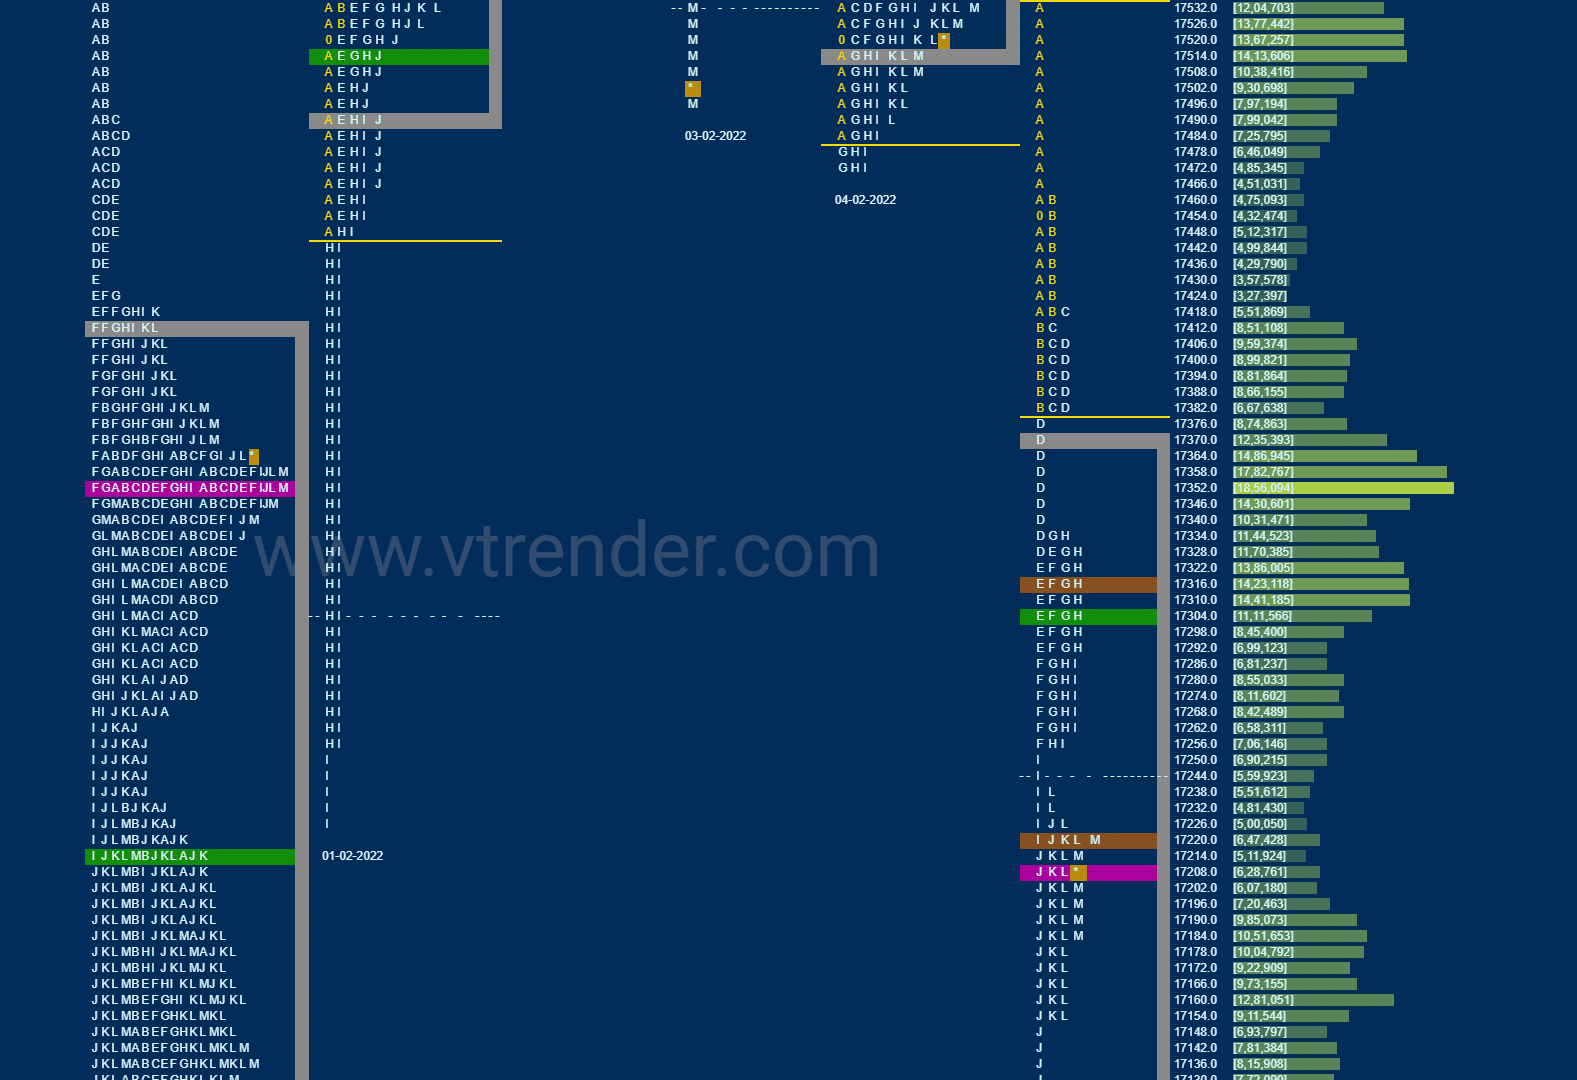 Nf 4 Market Profile Analysis Dated 07Th February 2022 Banknifty Futures, Charts, Day Trading, Intraday Trading, Intraday Trading Strategies, Market Profile, Market Profile Trading Strategies, Nifty Futures, Order Flow Analysis, Support And Resistance, Technical Analysis, Trading Strategies, Volume Profile Trading